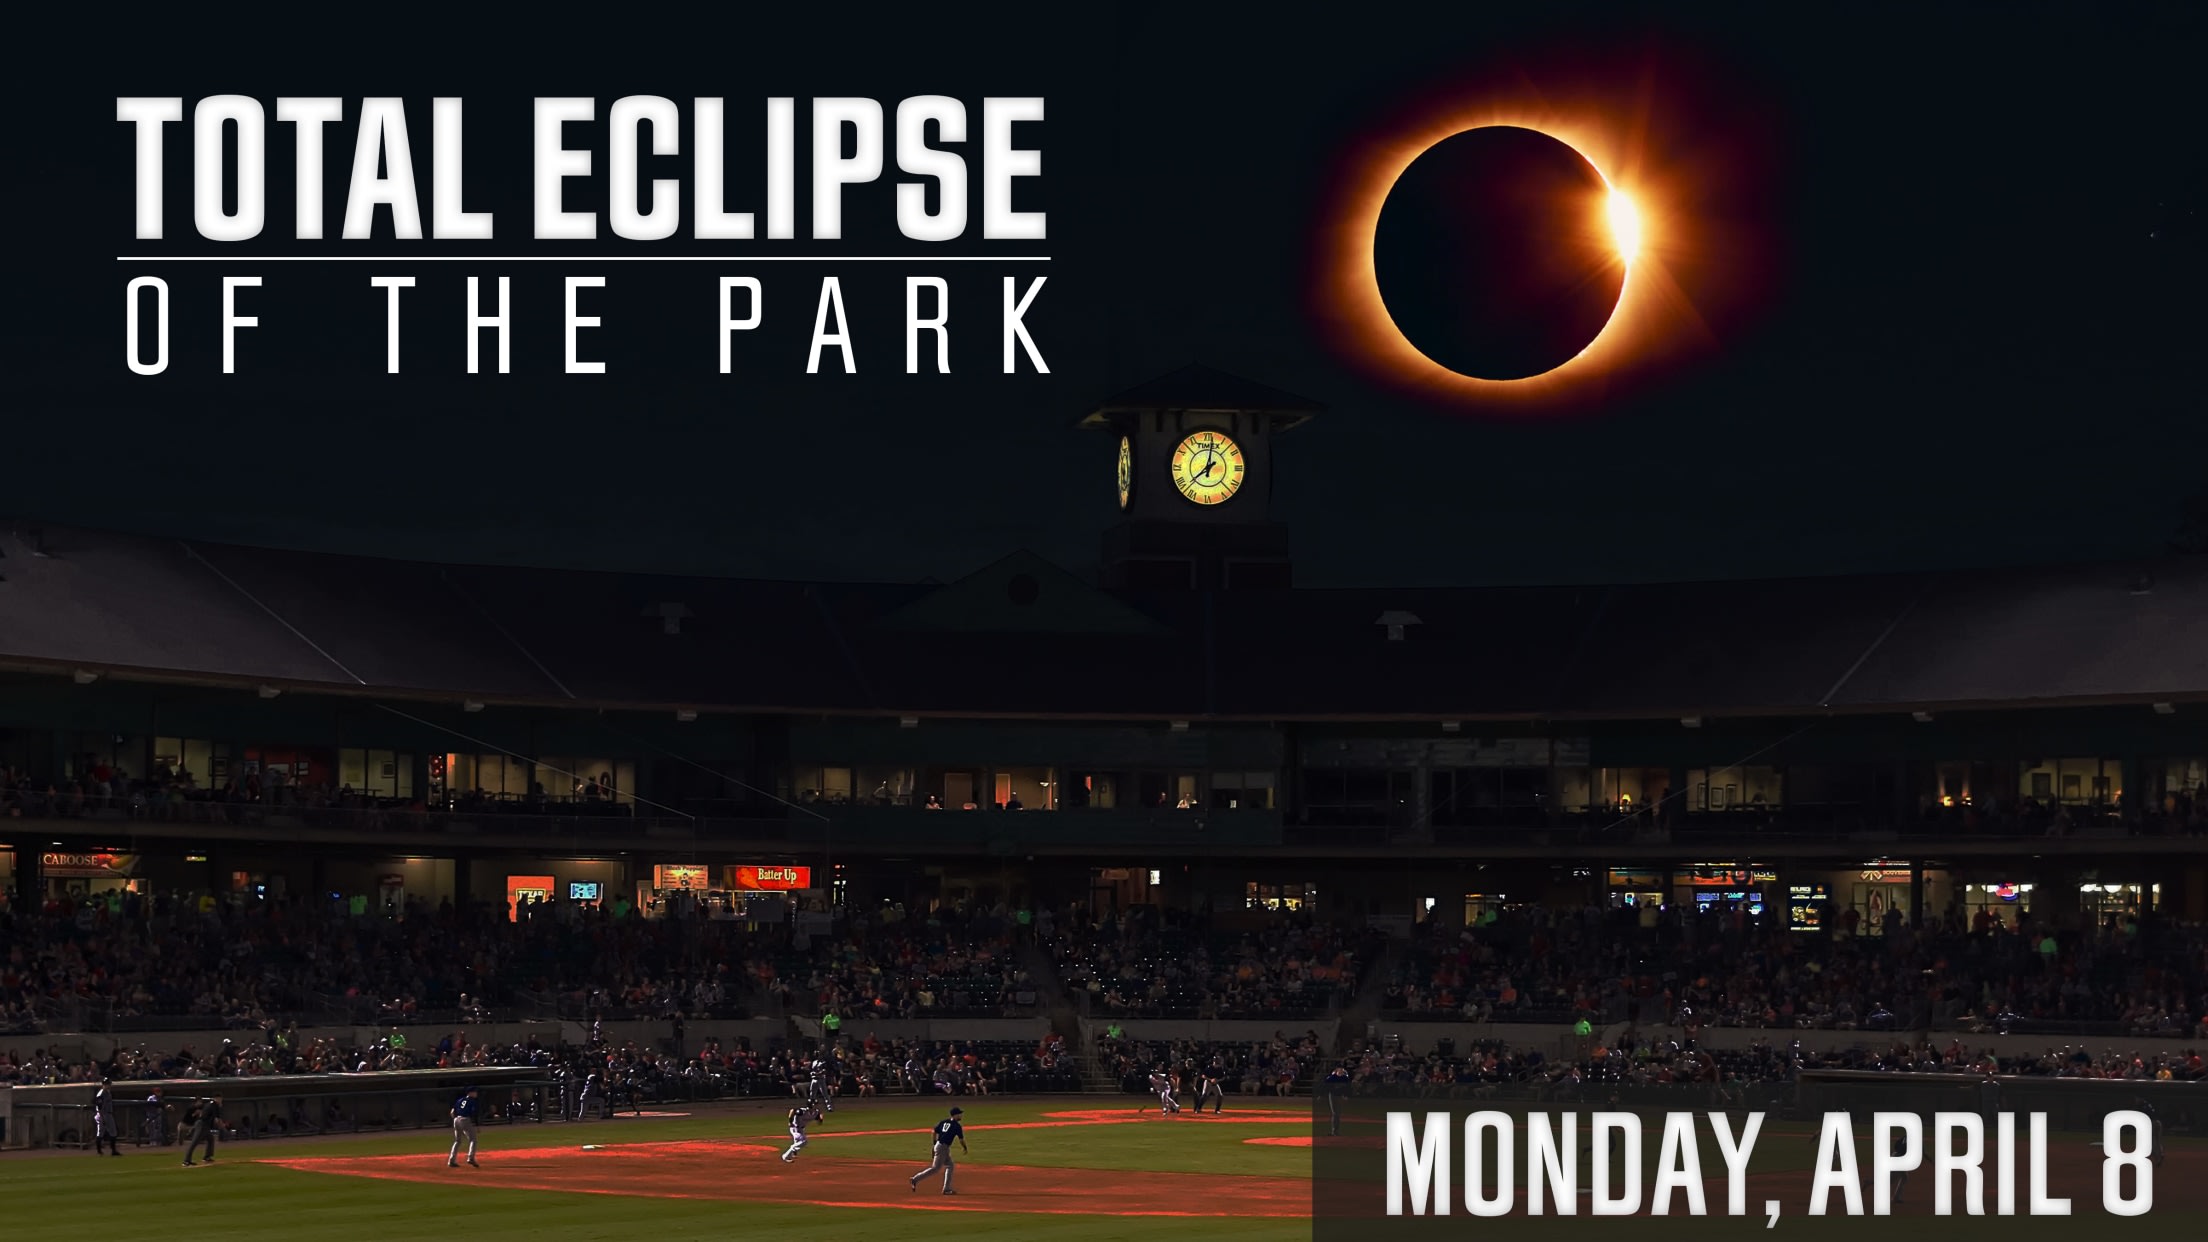 Photo of a Minor League stadium with the words ''Total eclipse of the park''